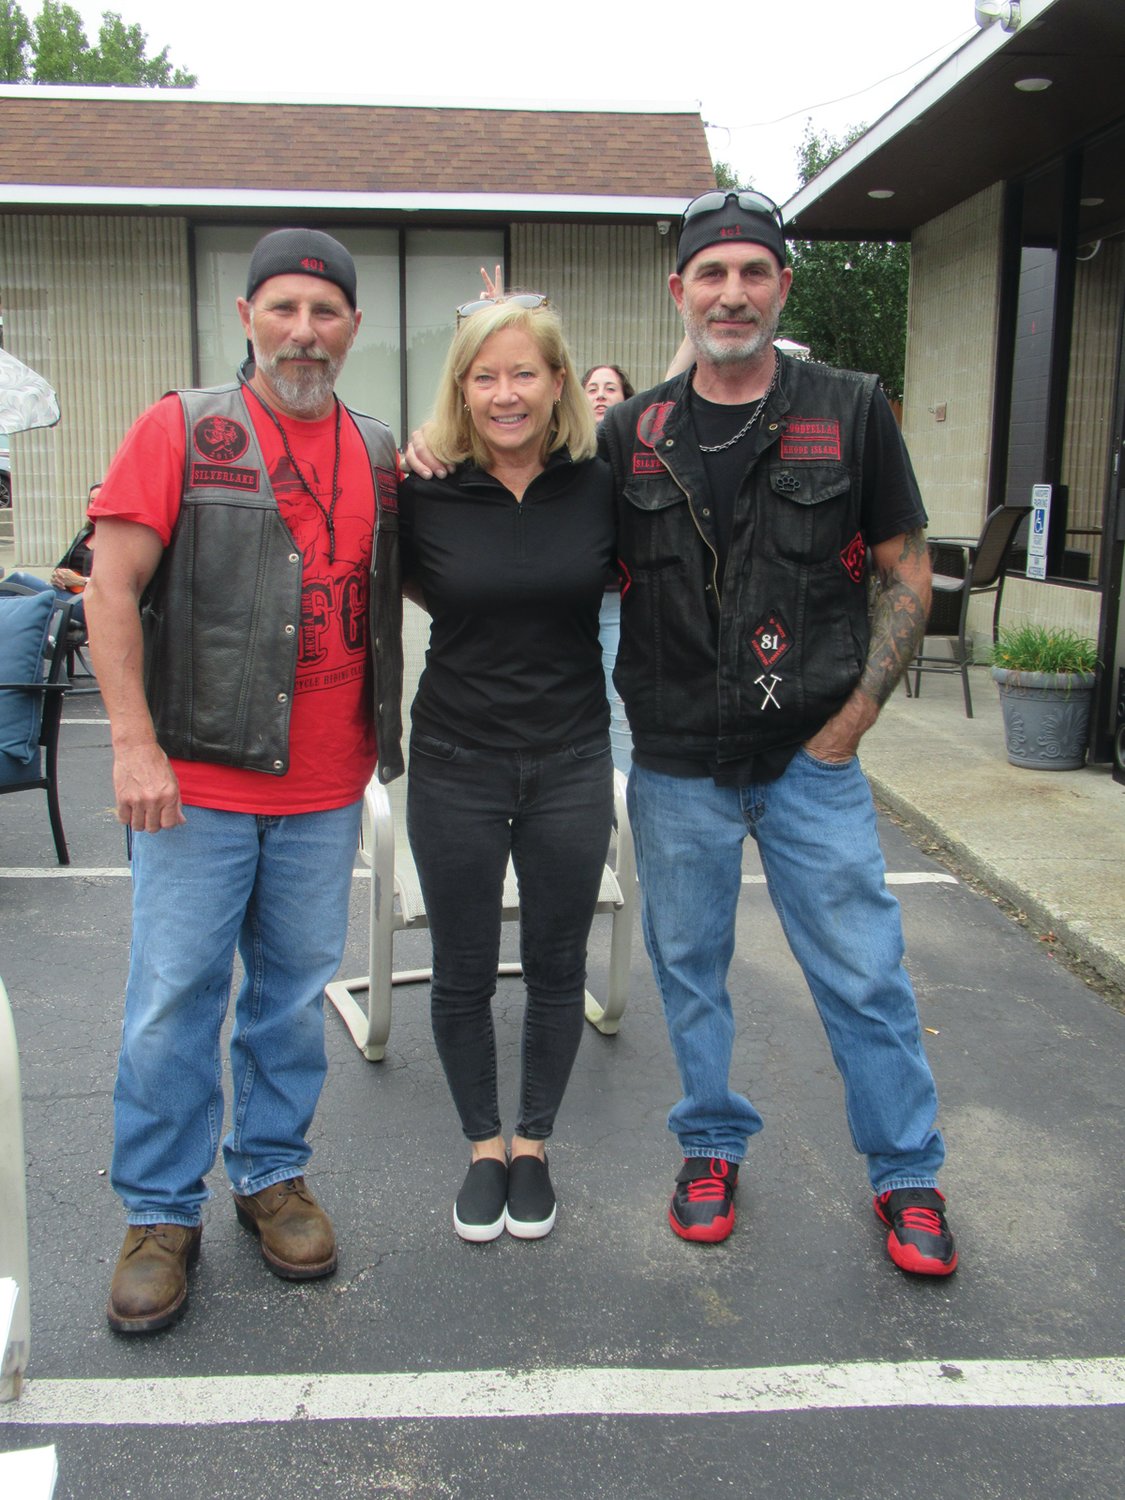 HASBRO HELPERS: Goodfellas Rick DeLuca and Kevin Heart join Michele Brannigan prior to the start of Saturday’s 5th annual motorcycle run that took in an estimated $20,000, an amount that’s expected to reach $40,000.